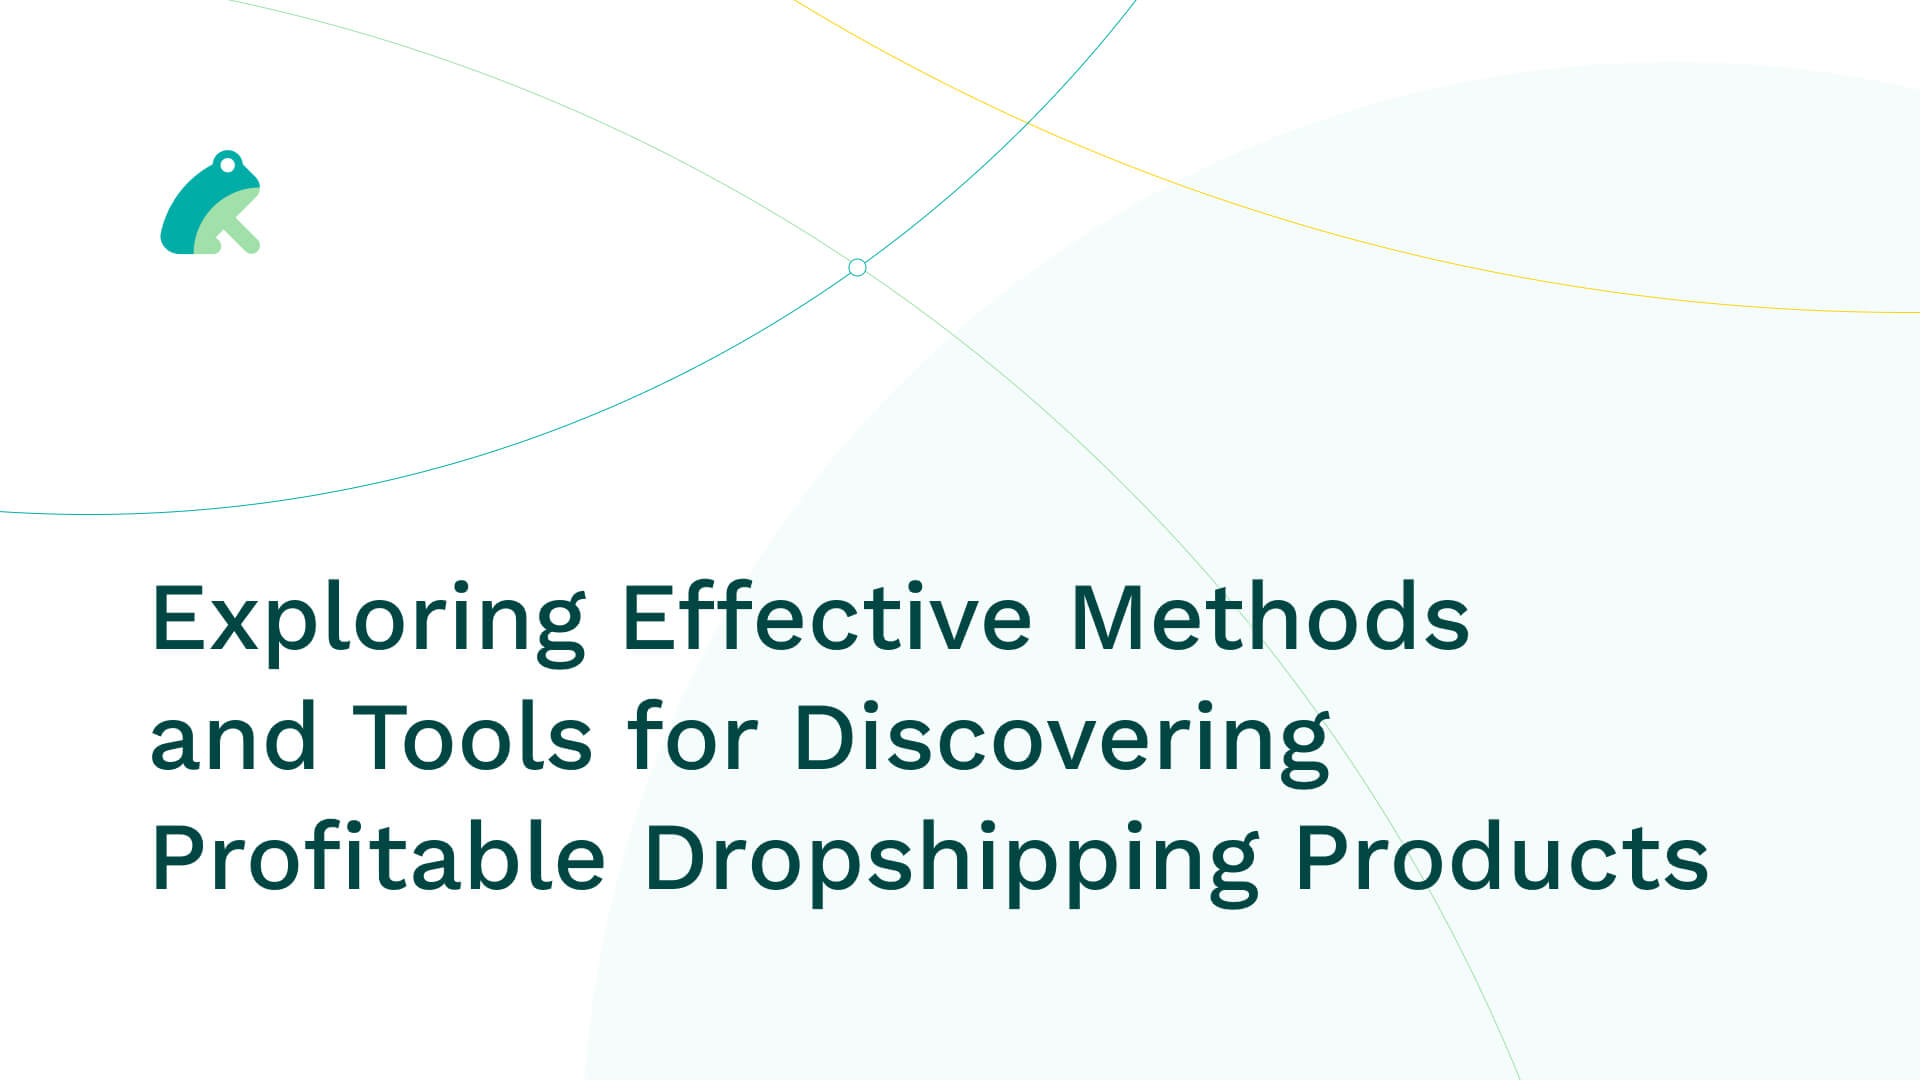 Exploring Effective Methods and Tools for Discovering Profitable Dropshipping Products